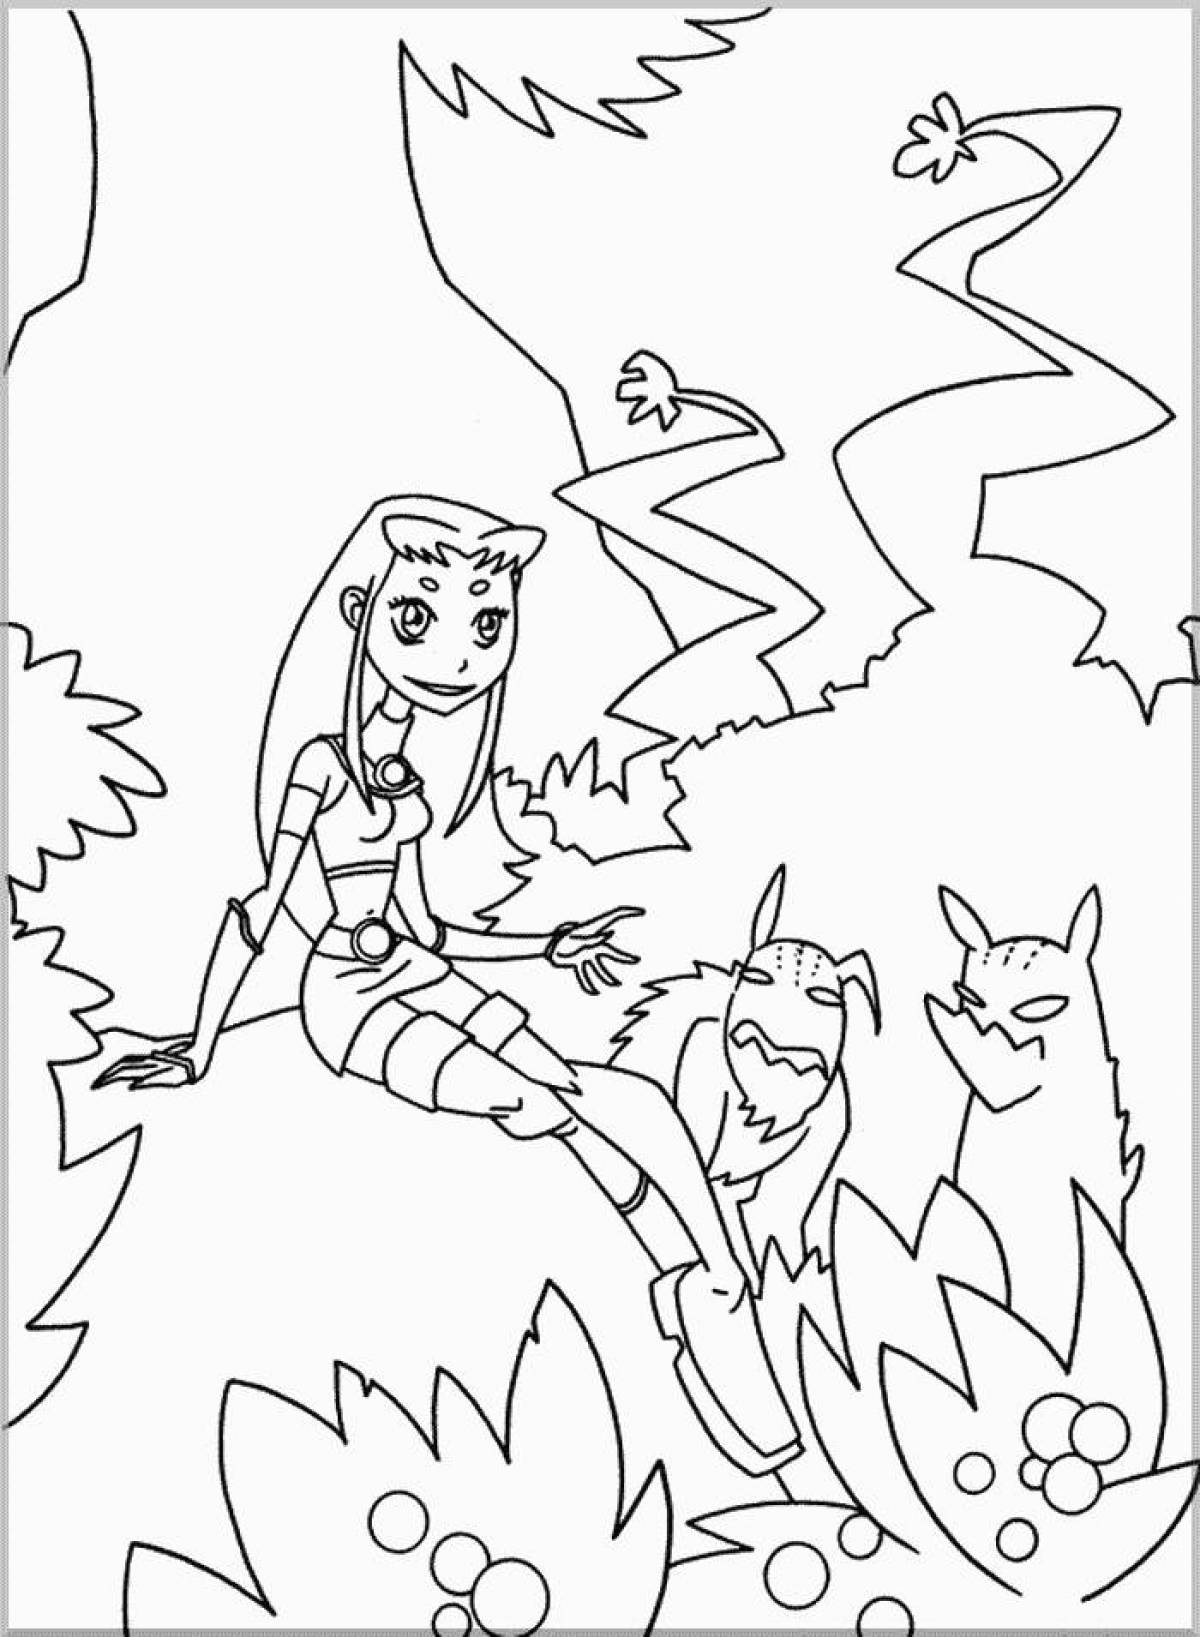 Teen Titans coloring page